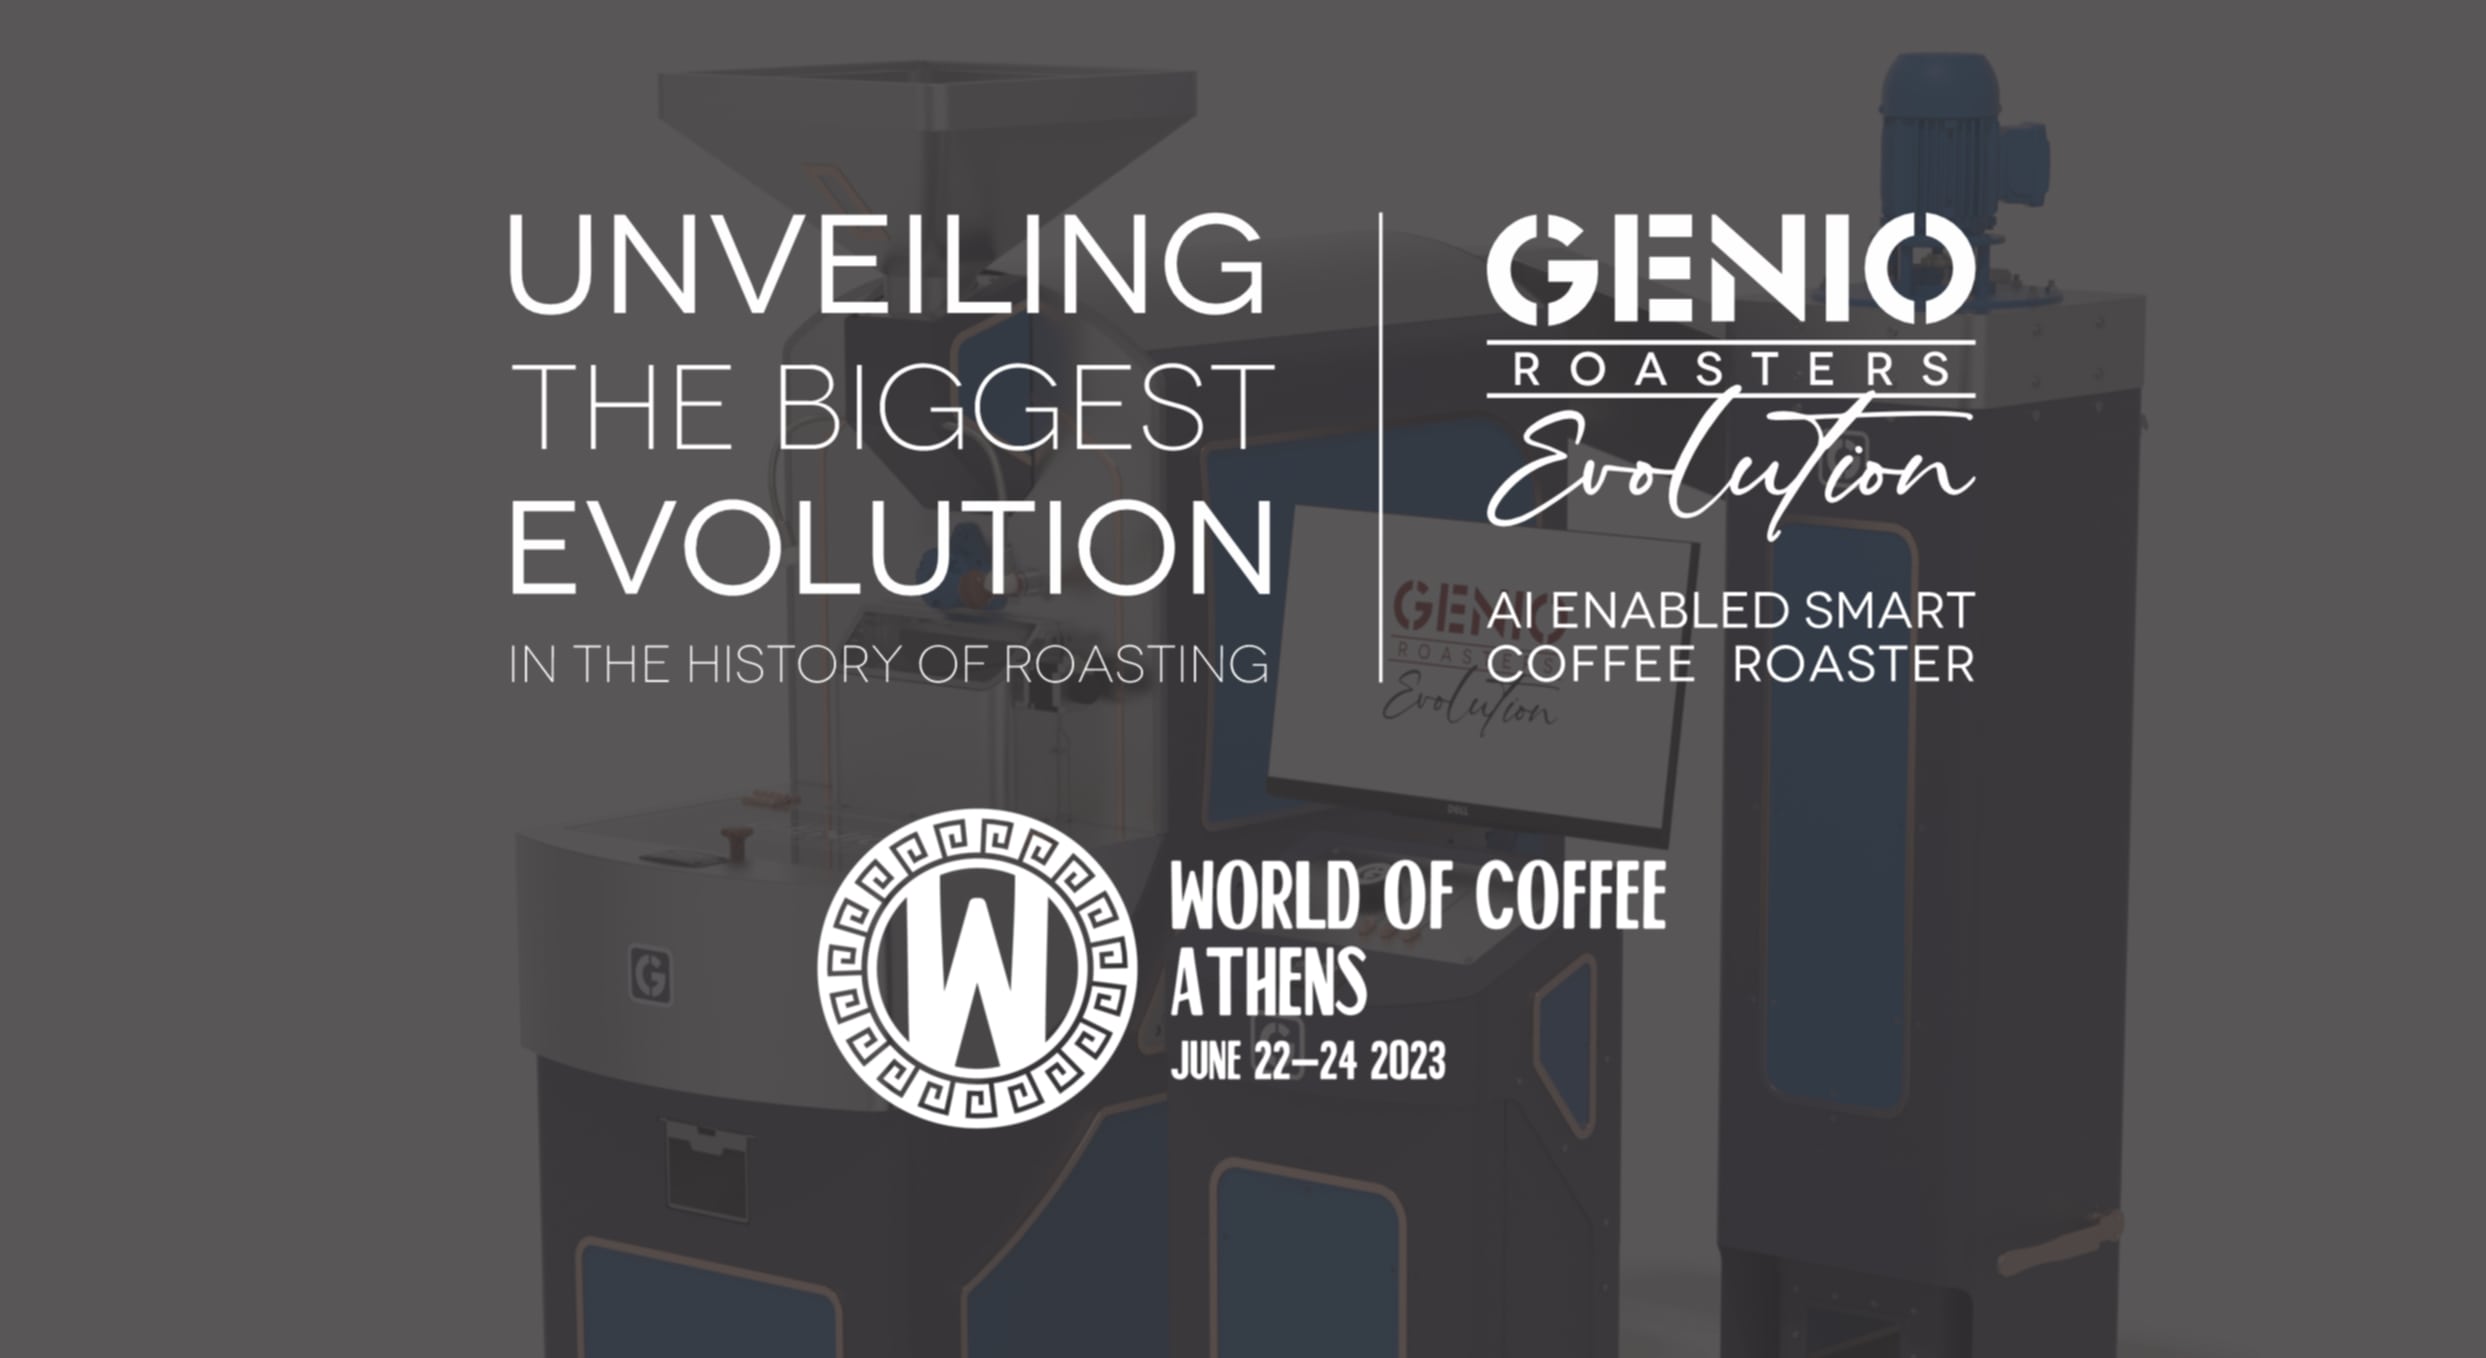 Genio Roasters Unveiling The Biggest Evolution In The History Of Roasting at World of Coffee Athens 2023.